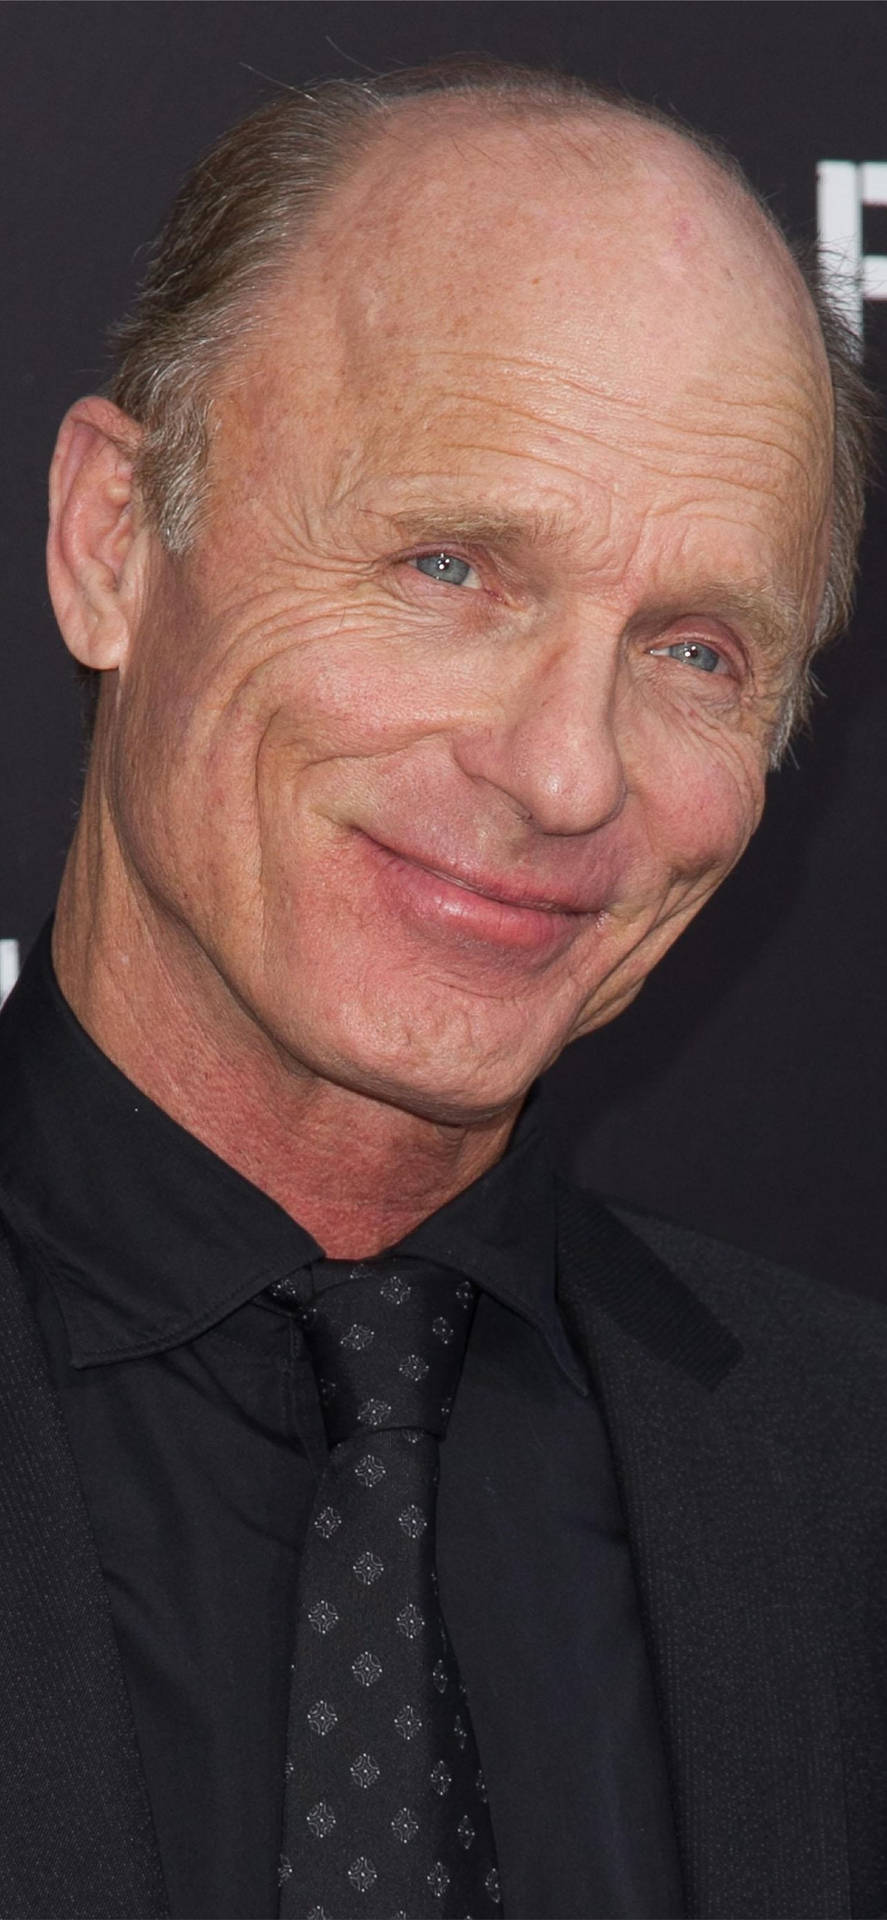 Actor Ed Harris Pain And Gain Movie Premiere Wallpaper